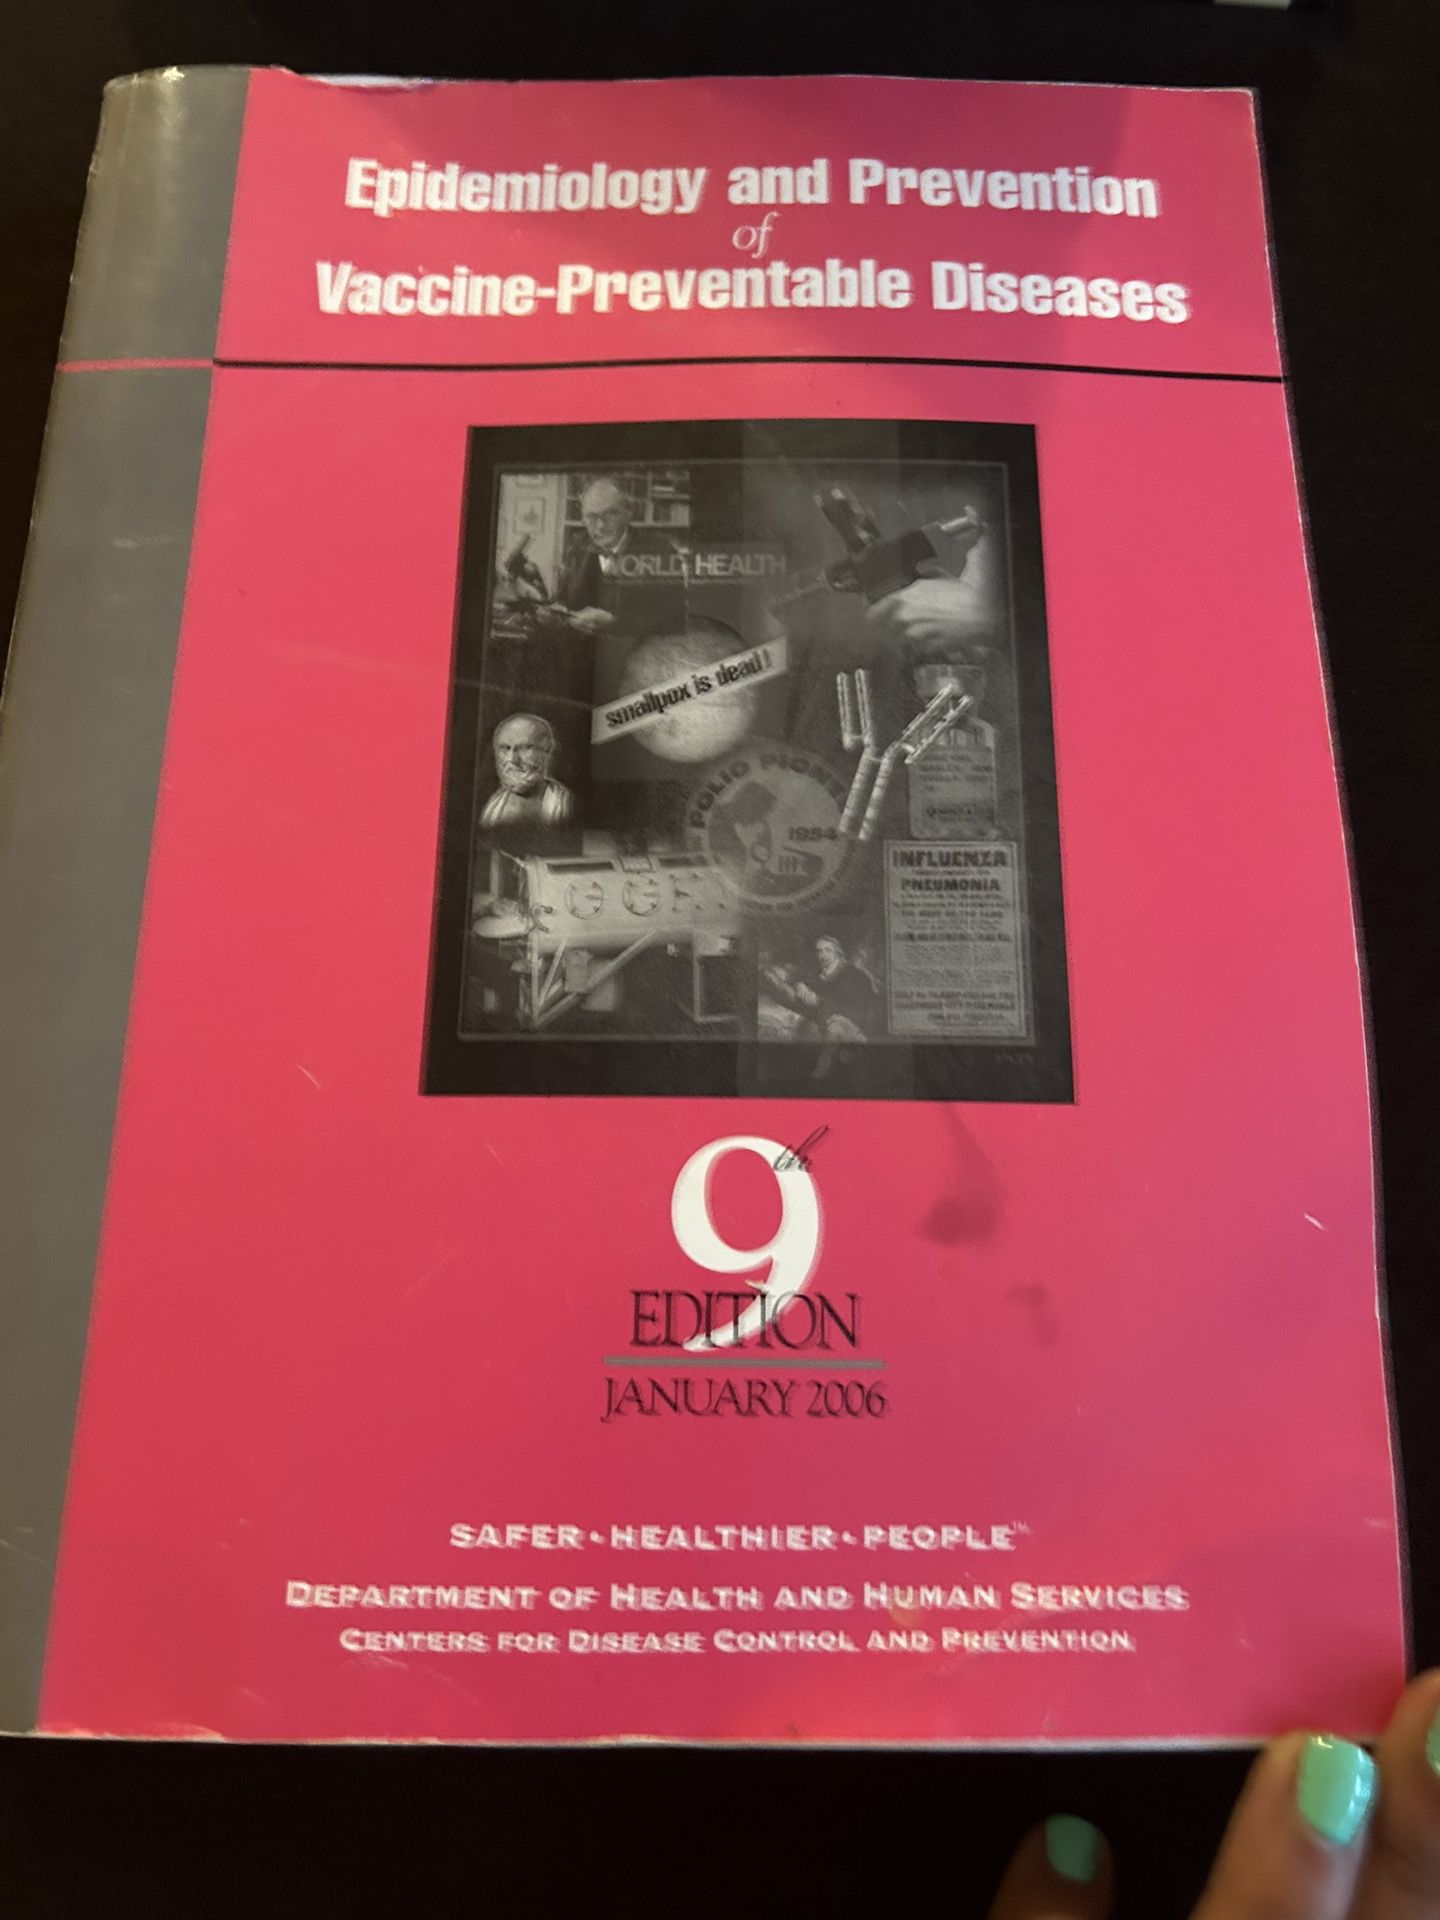 Epidemiology and Prevention ED 9 